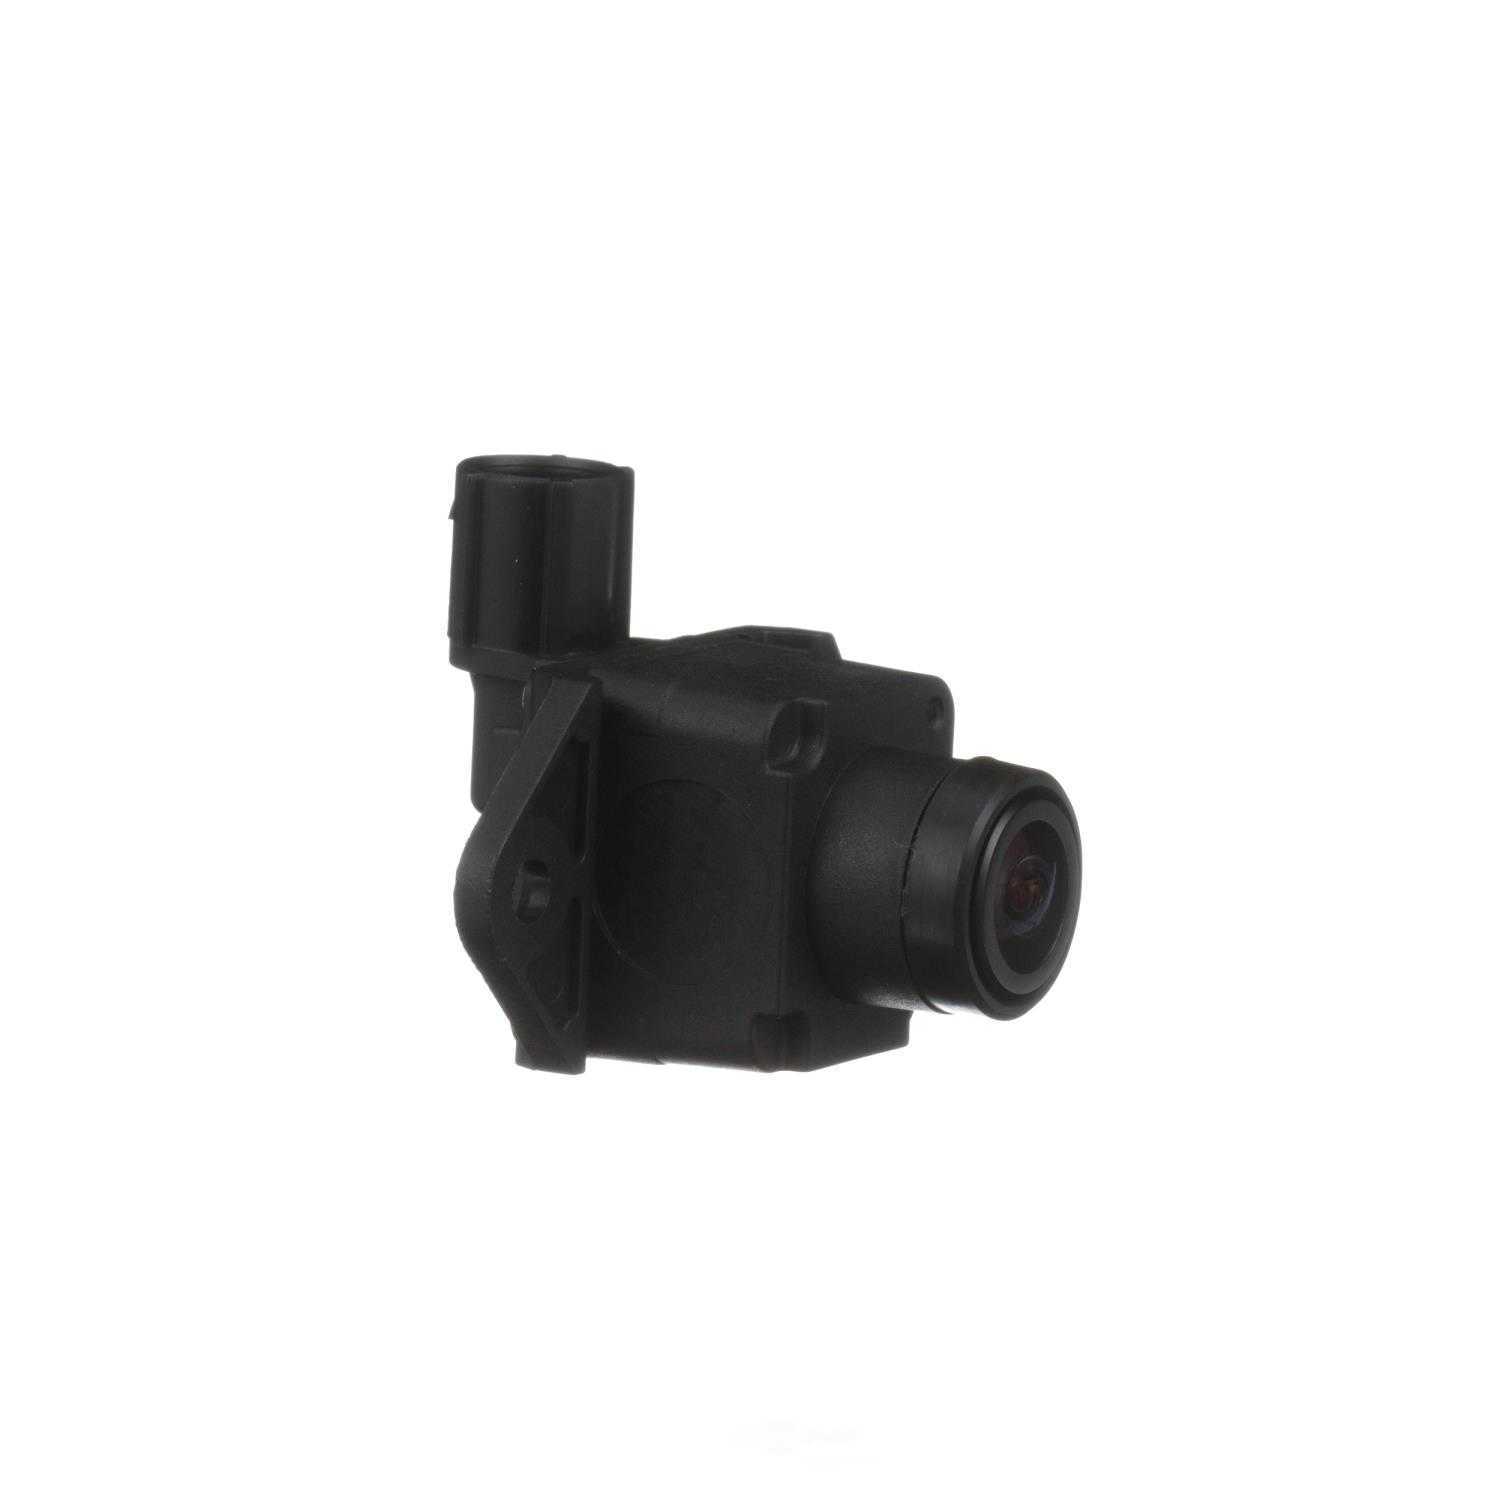 STANDARD MOTOR PRODUCTS - Park Assist Camera - STA PAC130